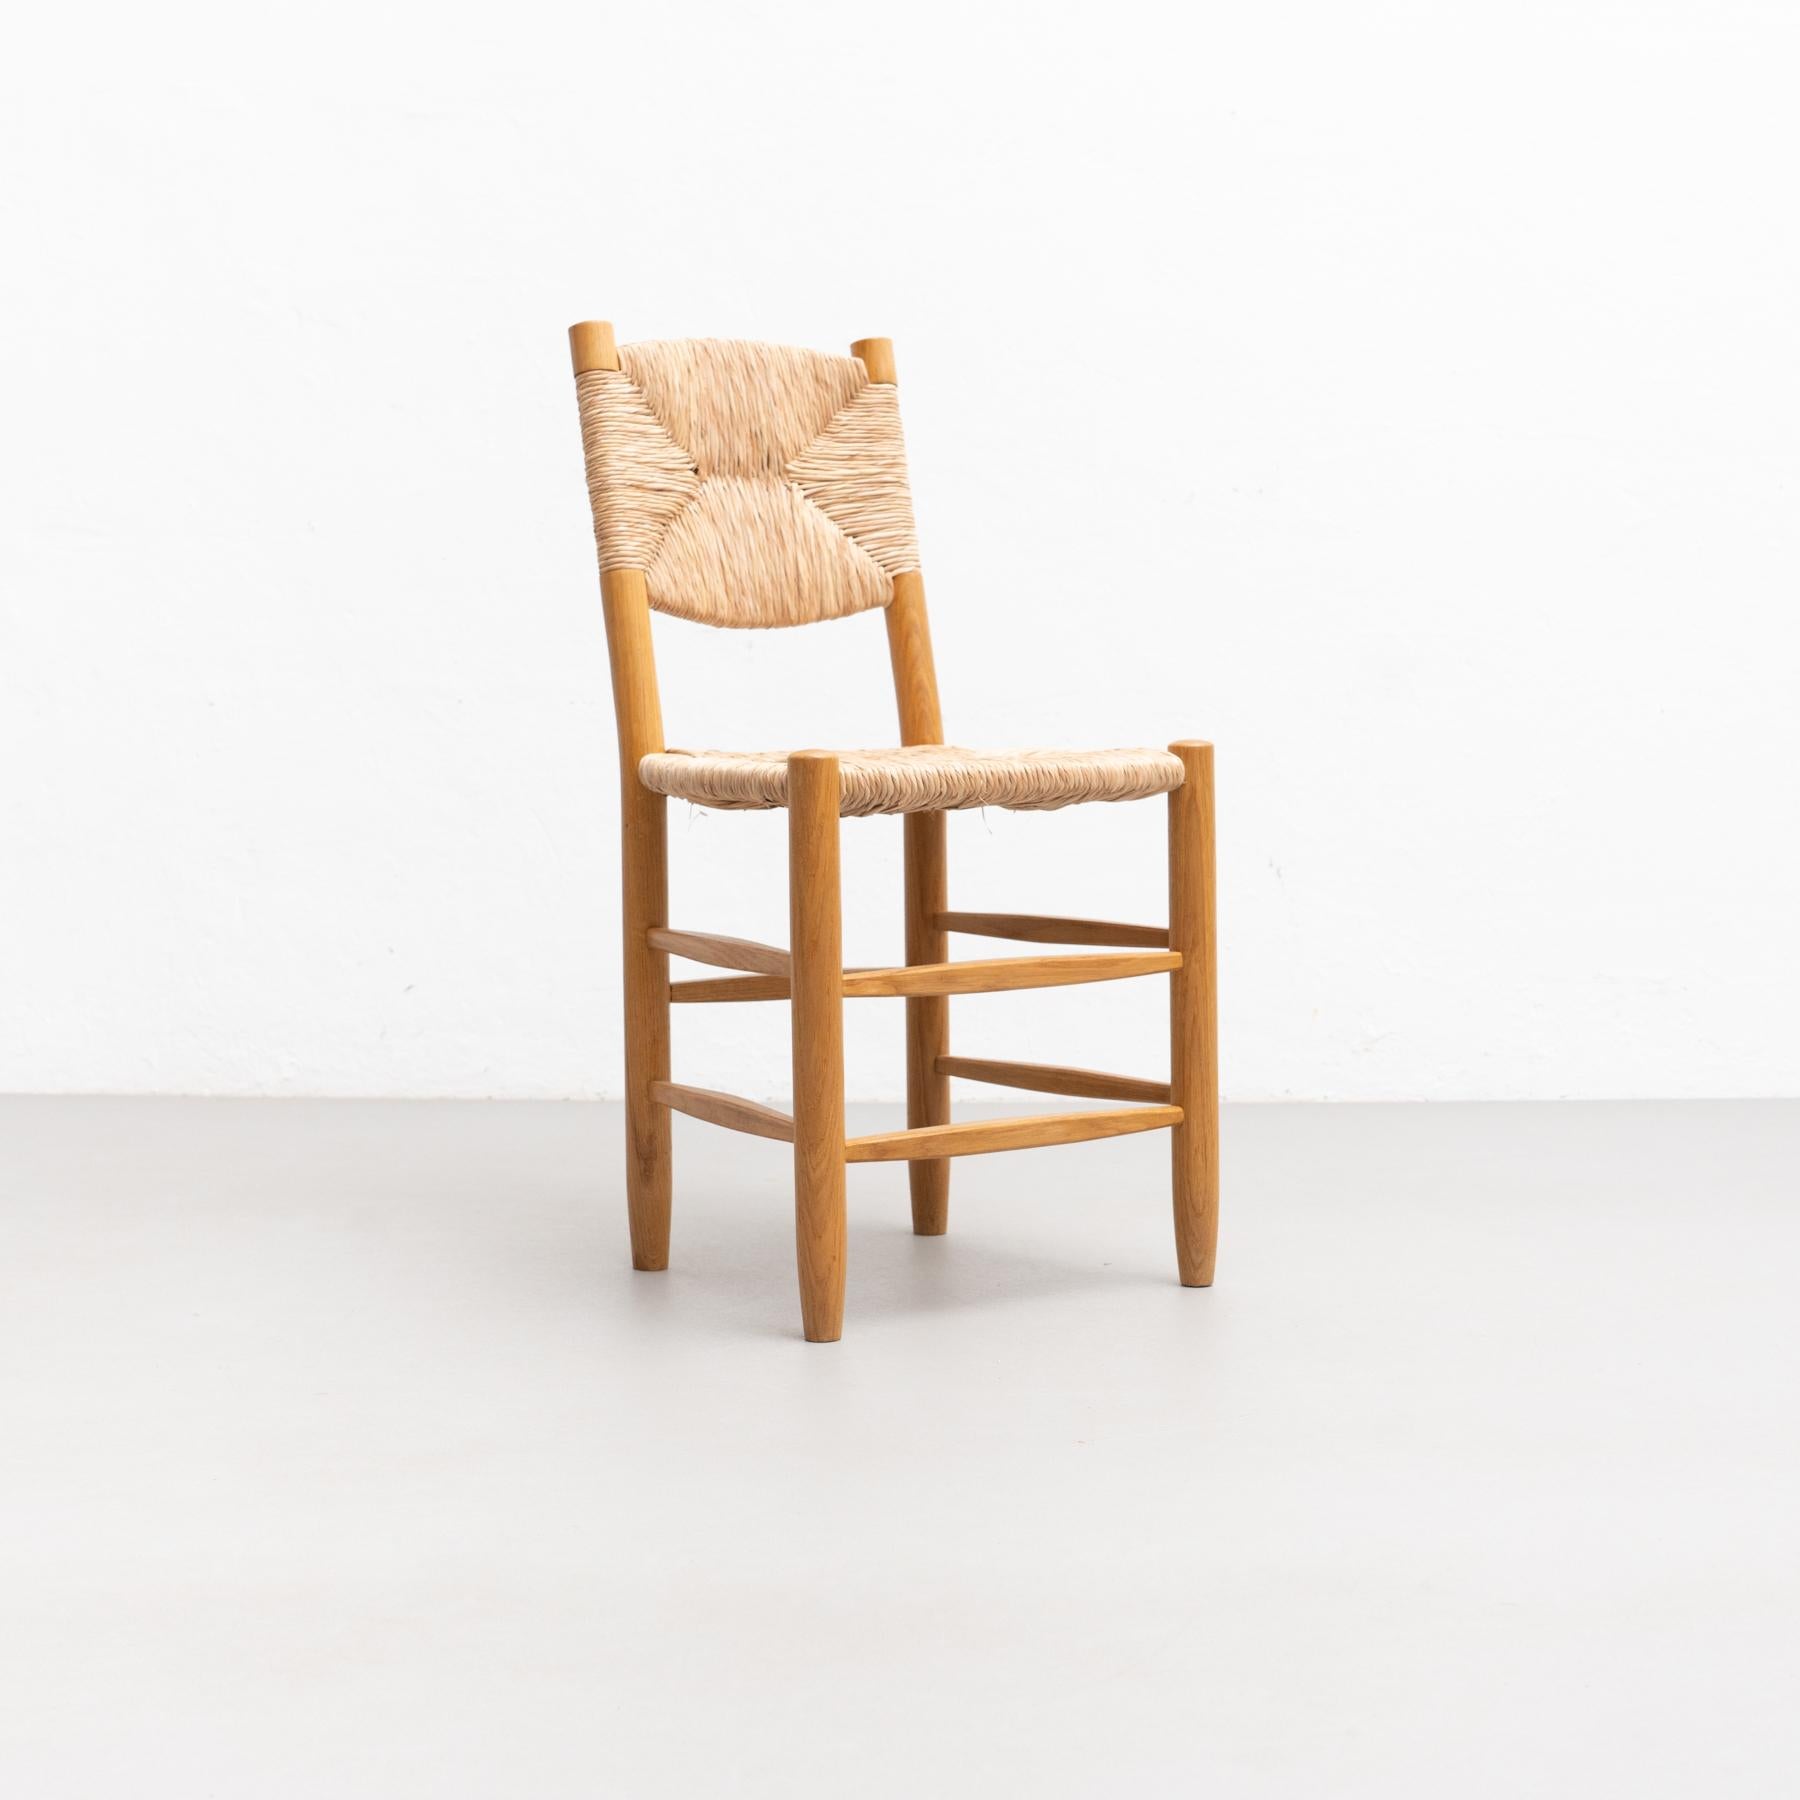 French After Charlotte Perriand N.19 Chair, Wood Rattan, Mid-Century Modern